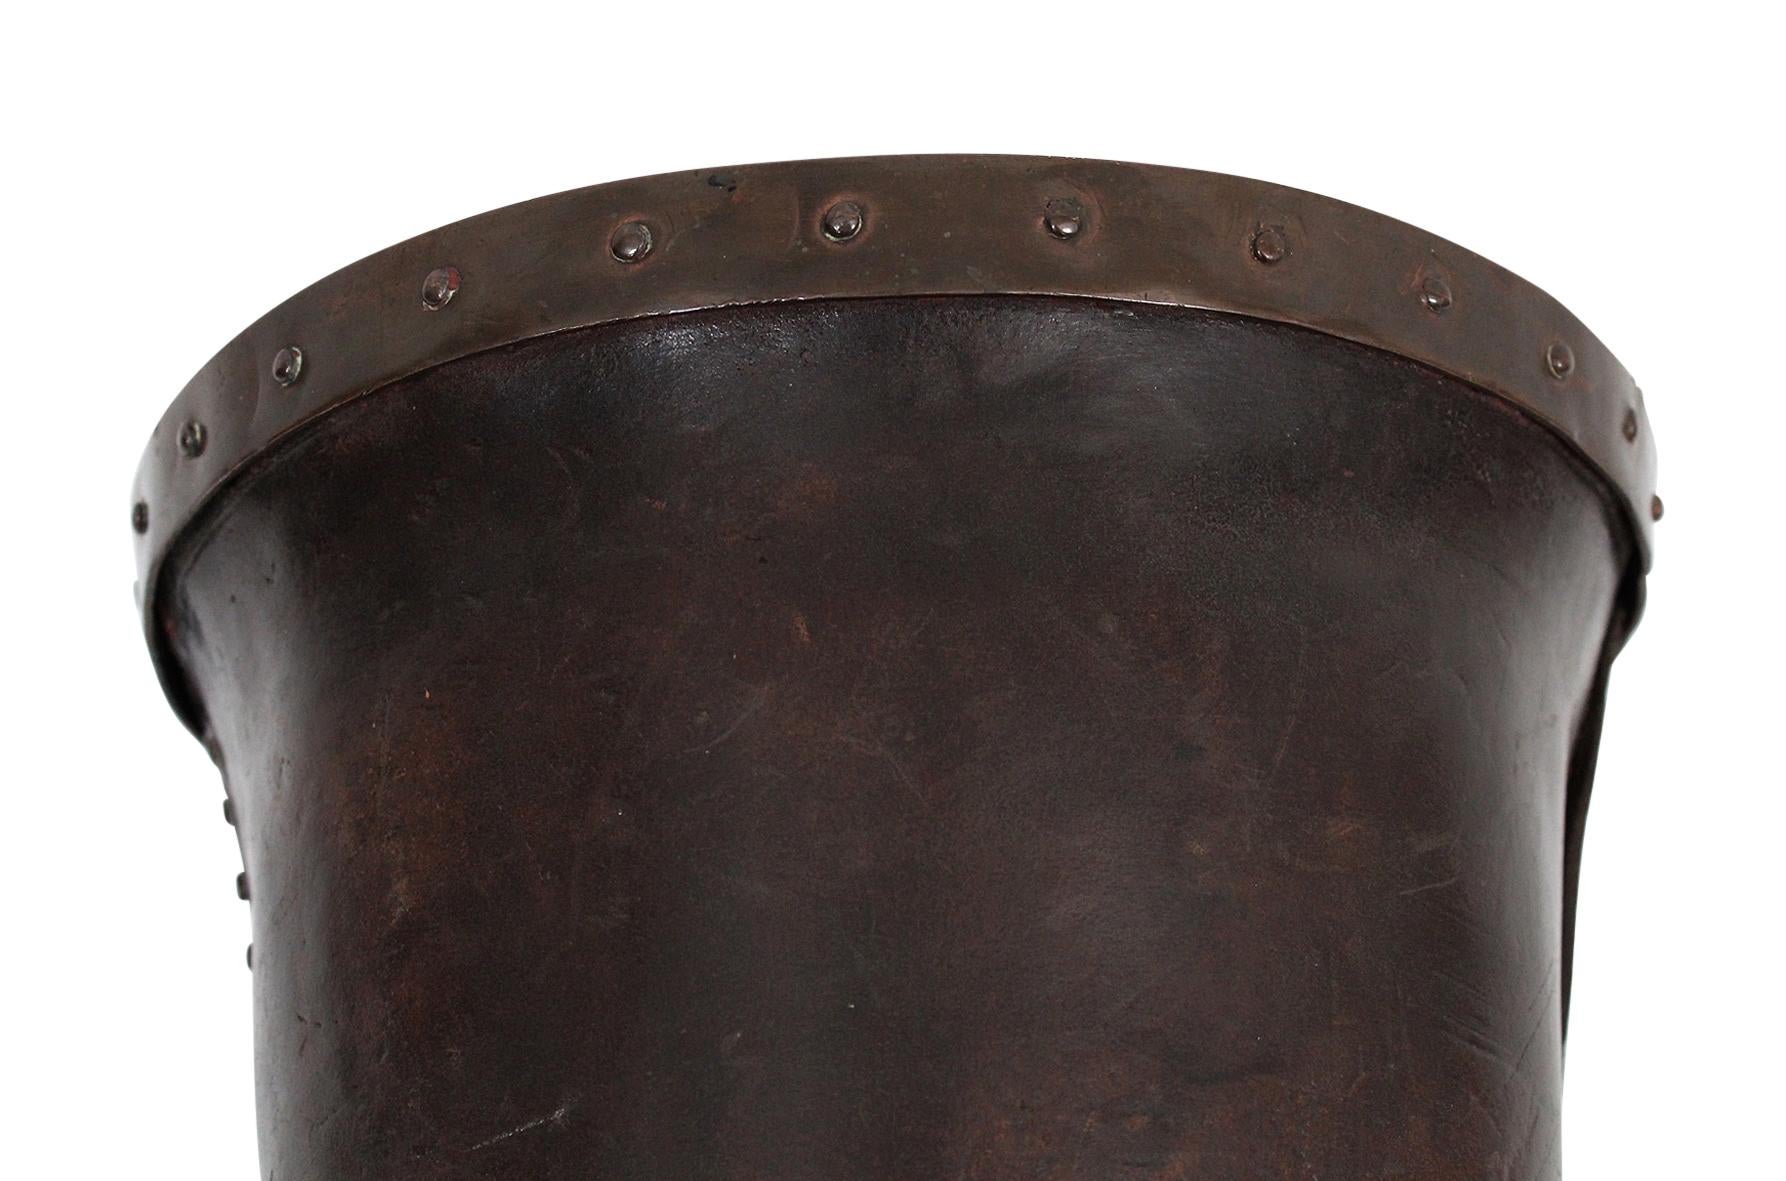 Distressed and Riveted Leather Wastebasket 6